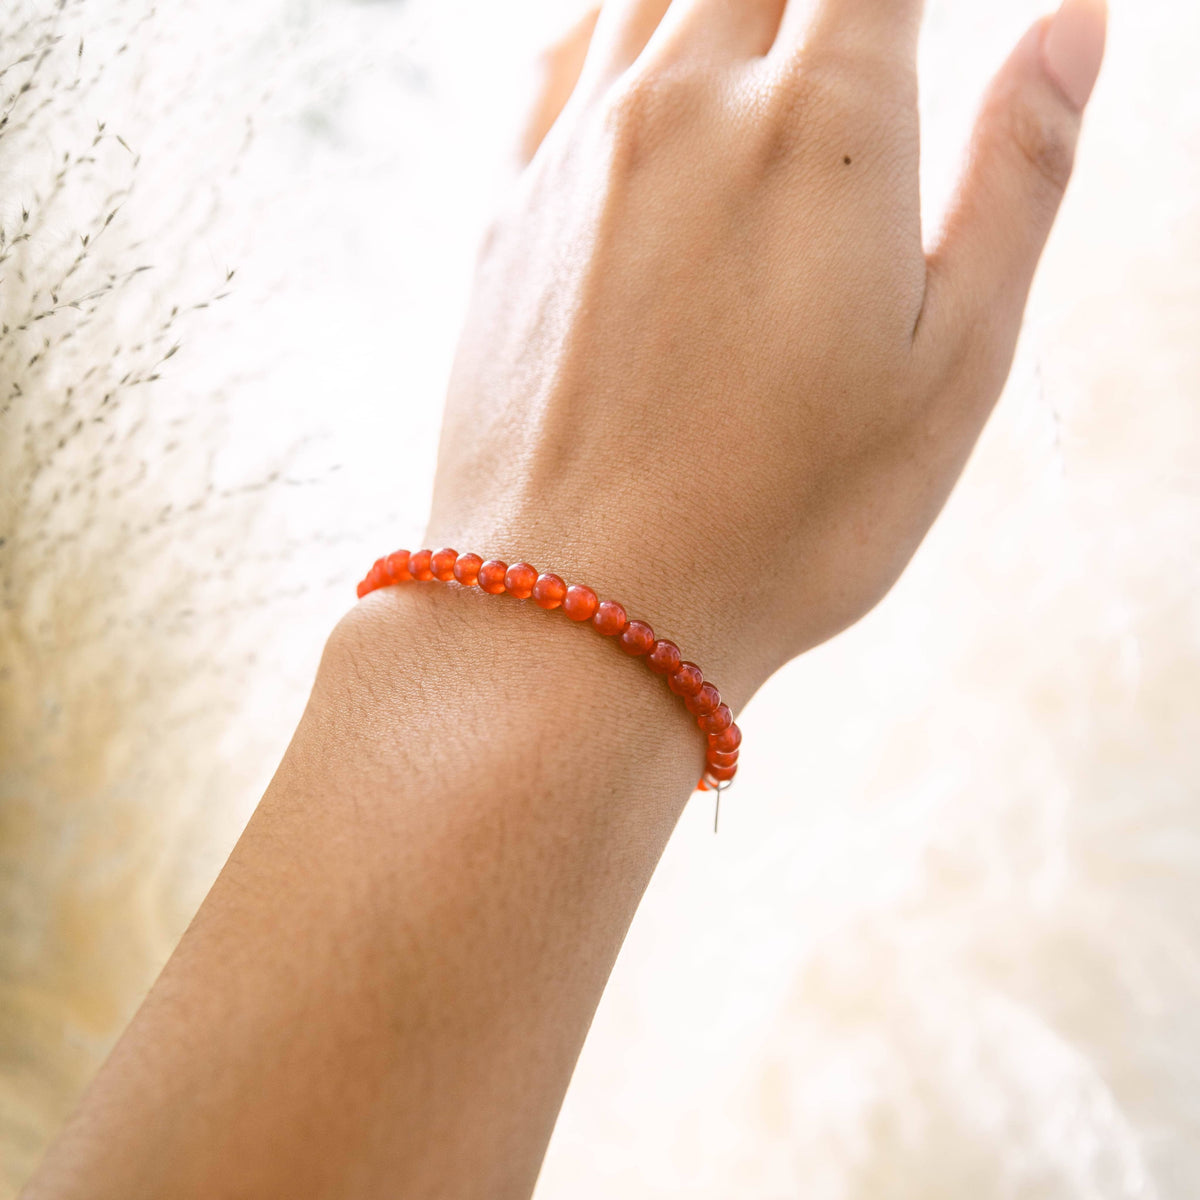 Tiny Rituals Red Jade Energy Bracelet by Tiny Rituals